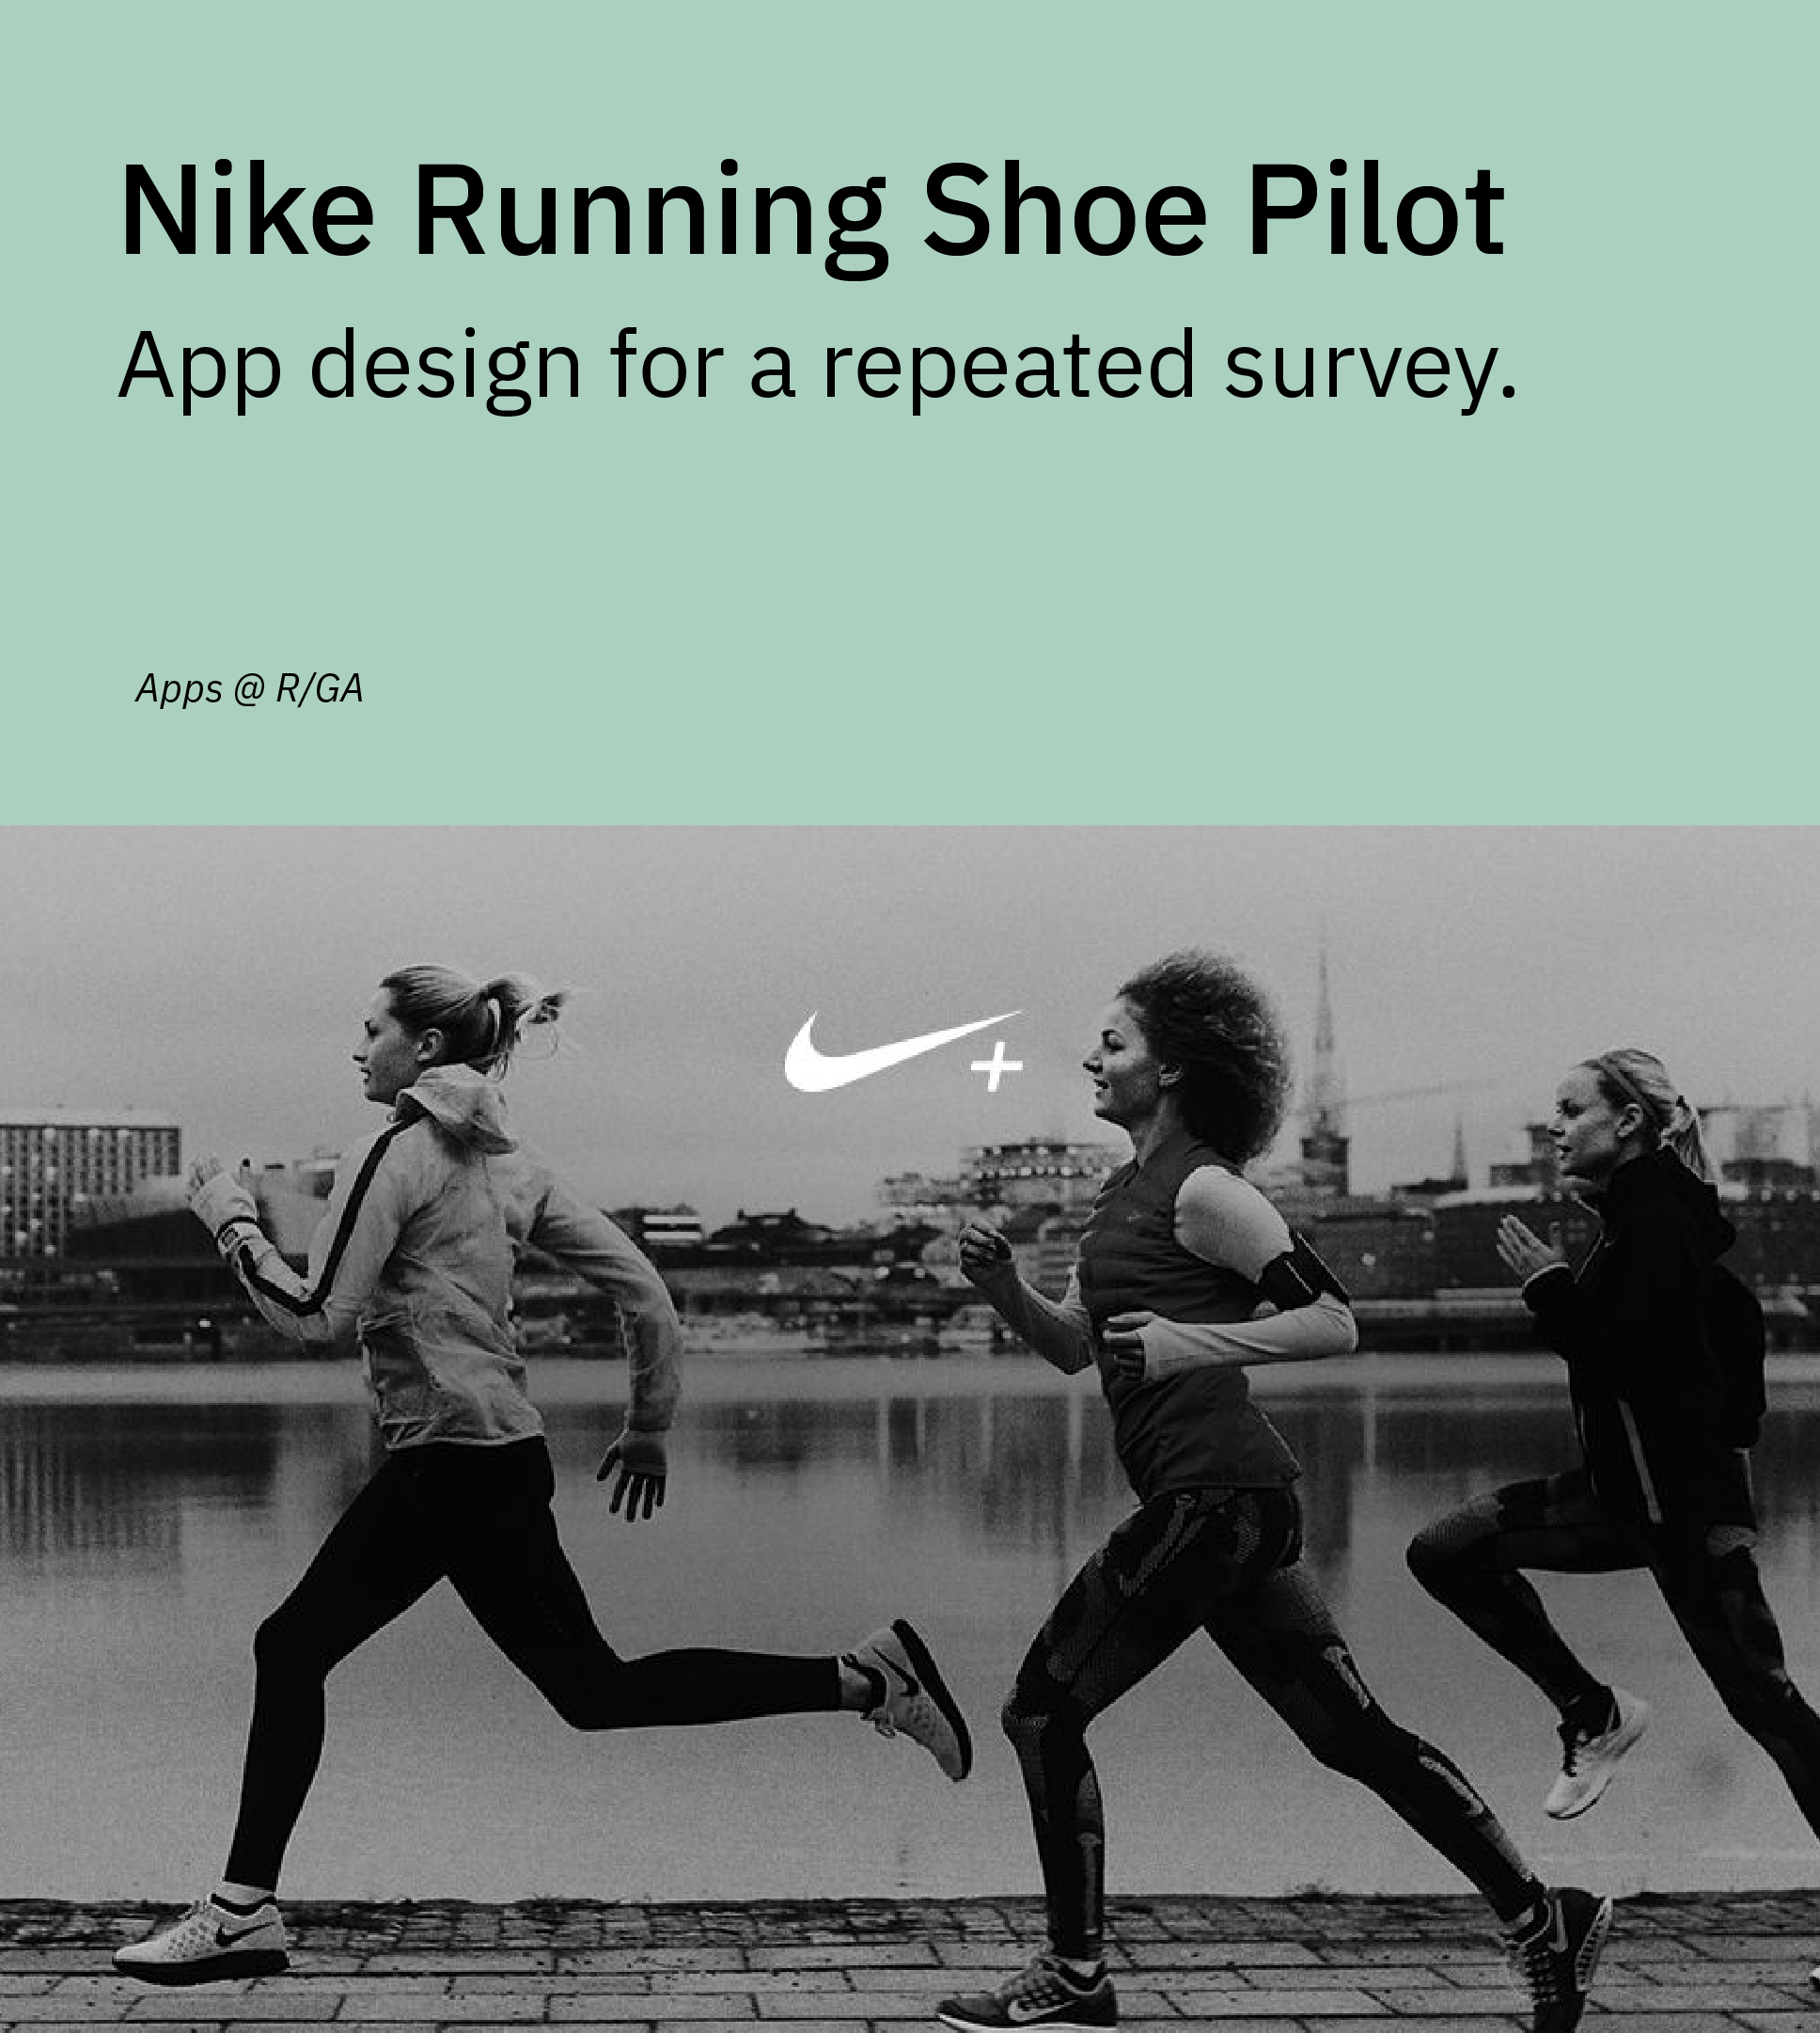 Repeated  Survey to collect feedback on nike shoes